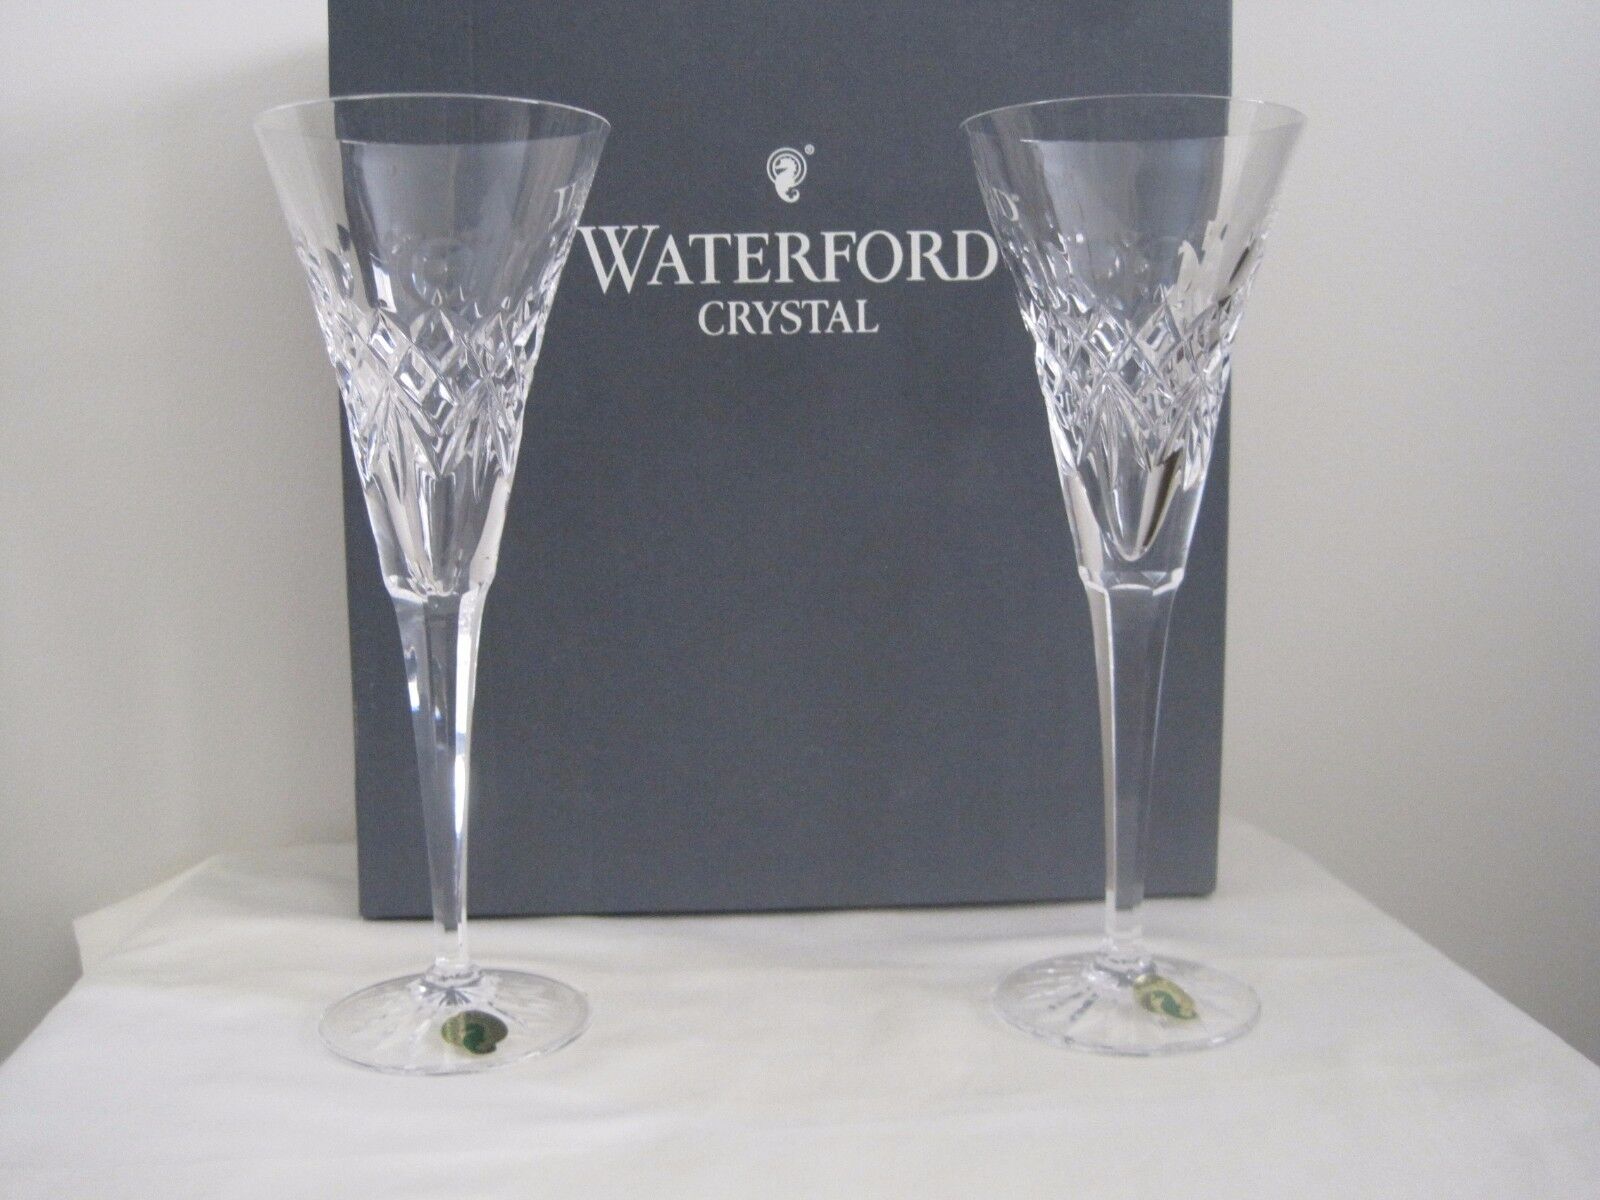 Disney Waterford Flutes with Mickey Mouse Heads $1898.91 (RETIRED)